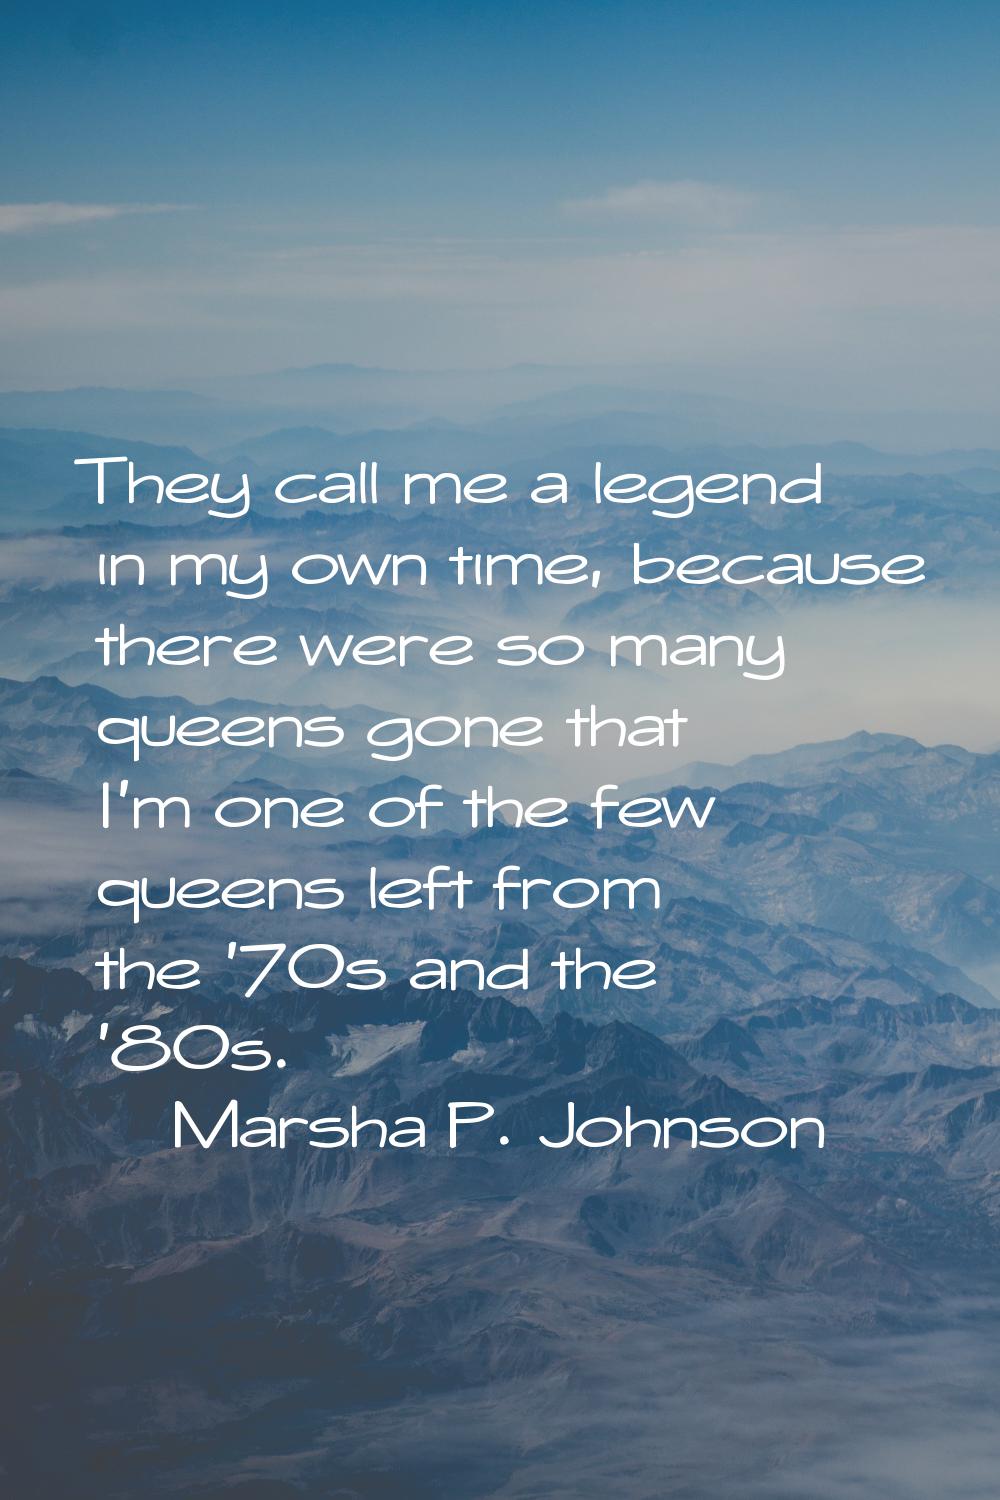 They call me a legend in my own time, because there were so many queens gone that I'm one of the fe